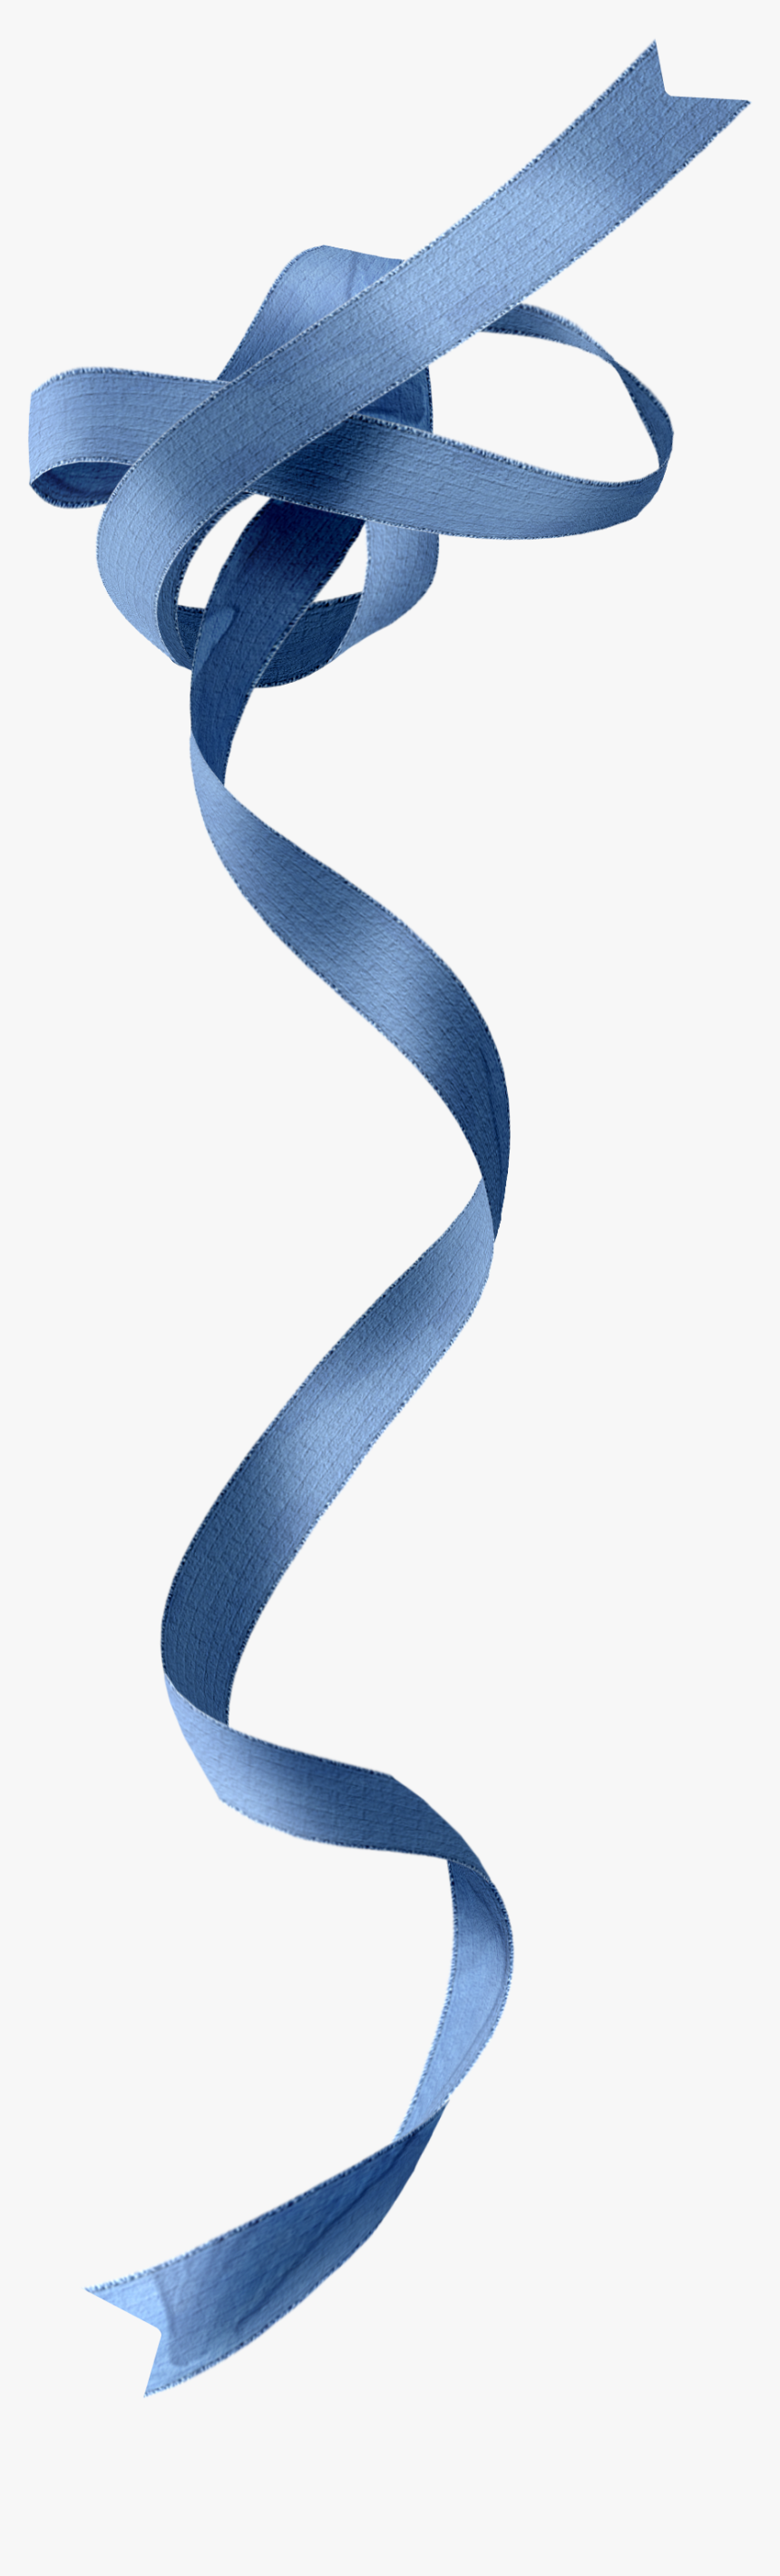 Blue Ribbon Png Image - Portable Network Graphics, Transparent Png, Free Download